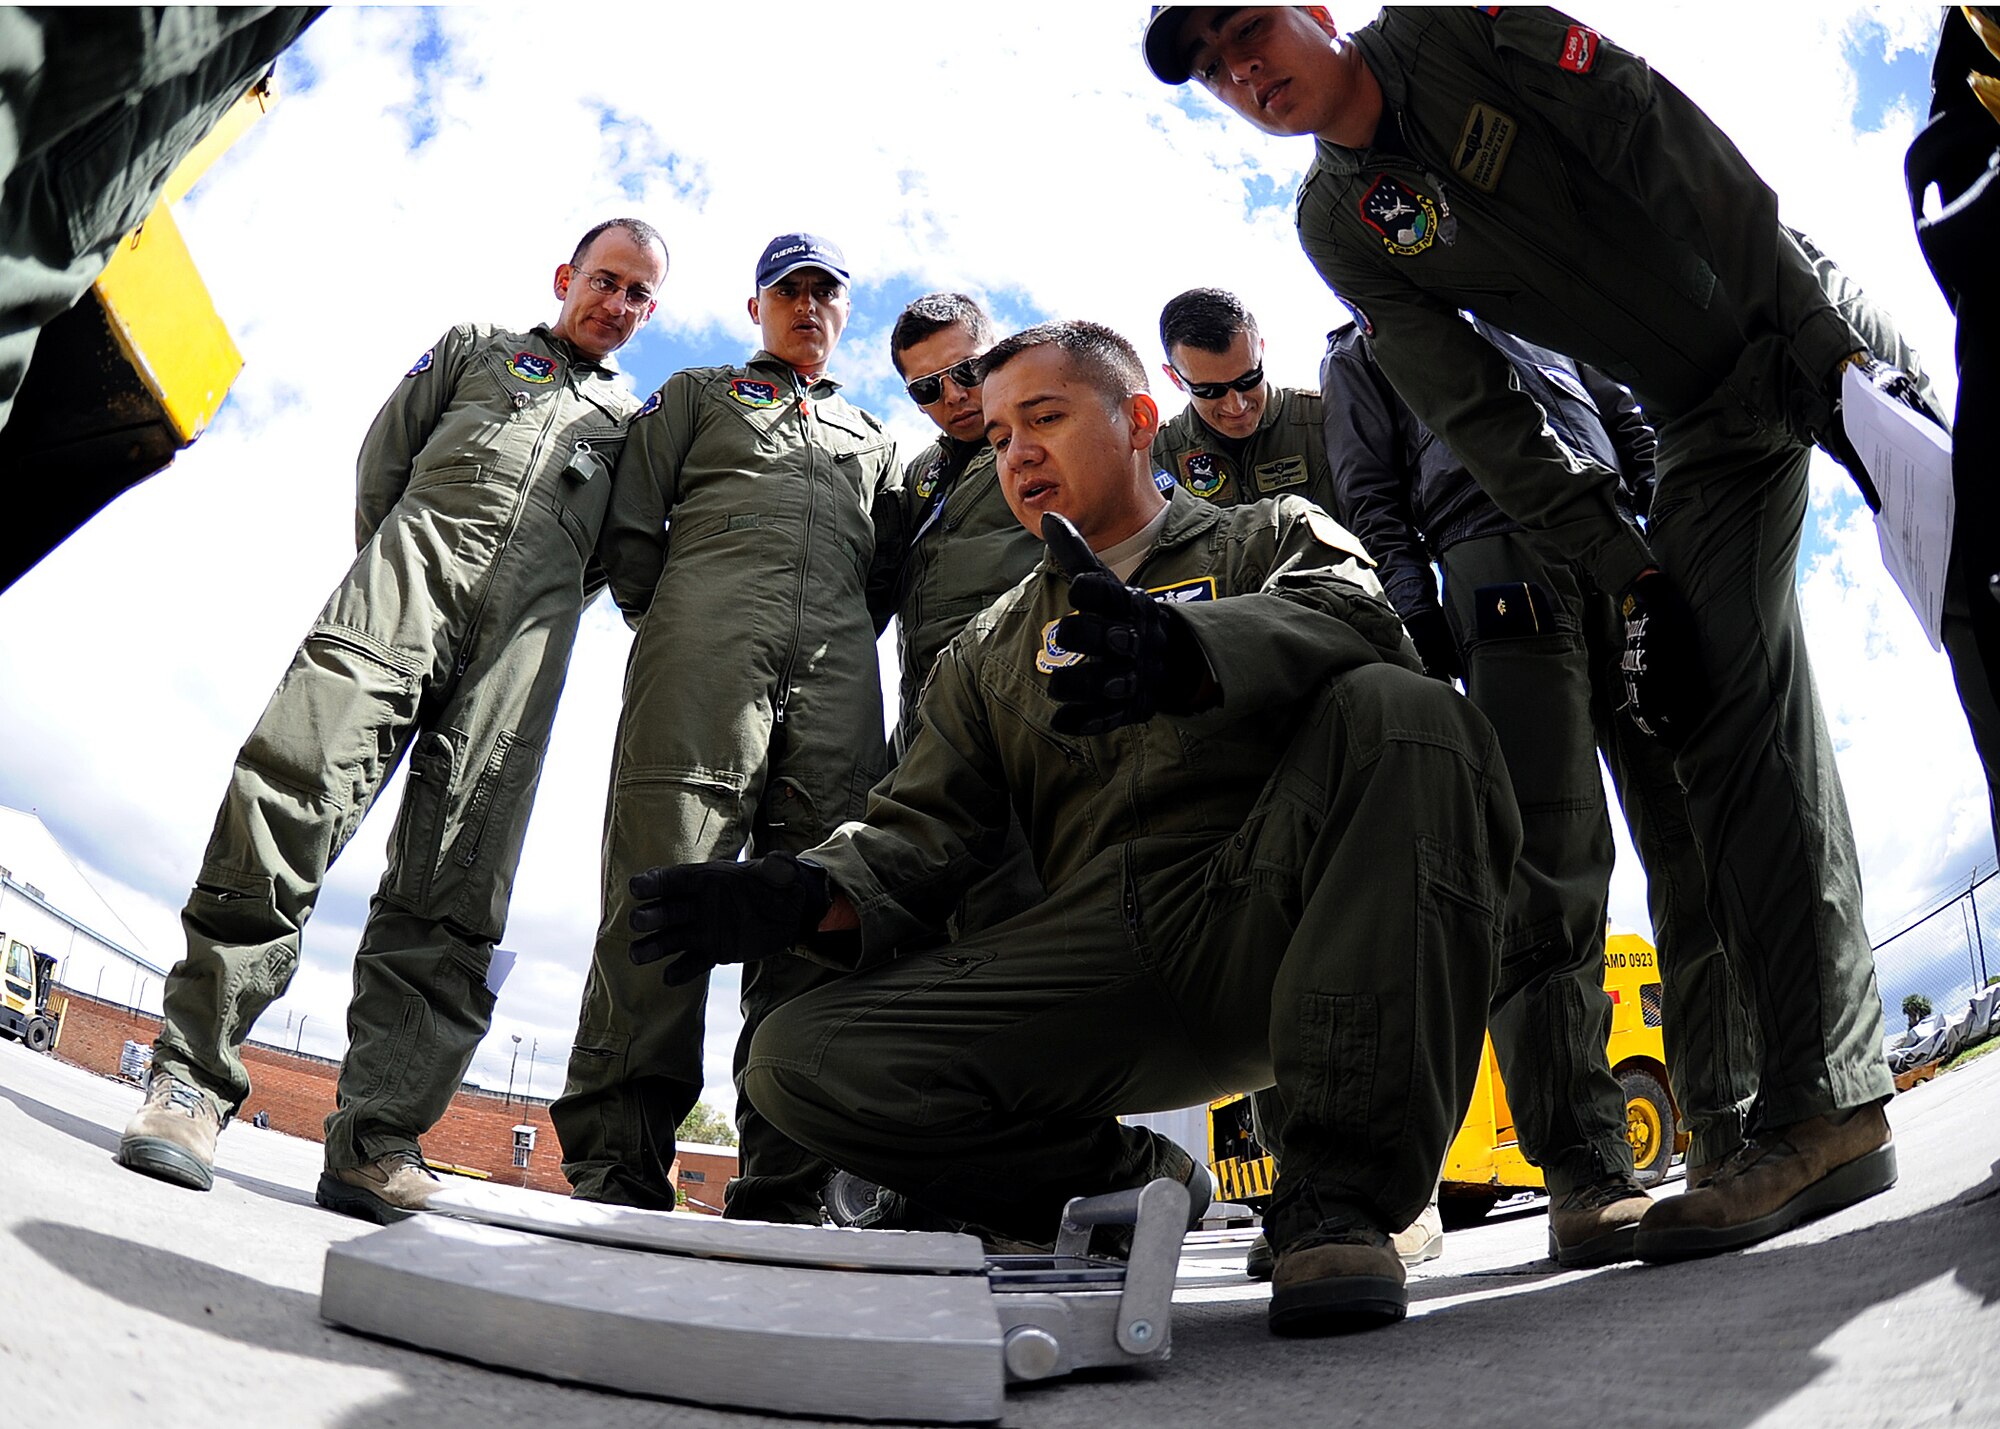 Staff Sgt. Jorge Borges, 571st Mobility Support Advisory Squadron loadmaster air advisor, explains how the portable scales work during the pallet build-up seminar June 6 at Commando Aéreo de Transporte Militar, Bogota, Colombia.  (U.S. Air Force photo by Tech. Sgt. Lesley Waters)